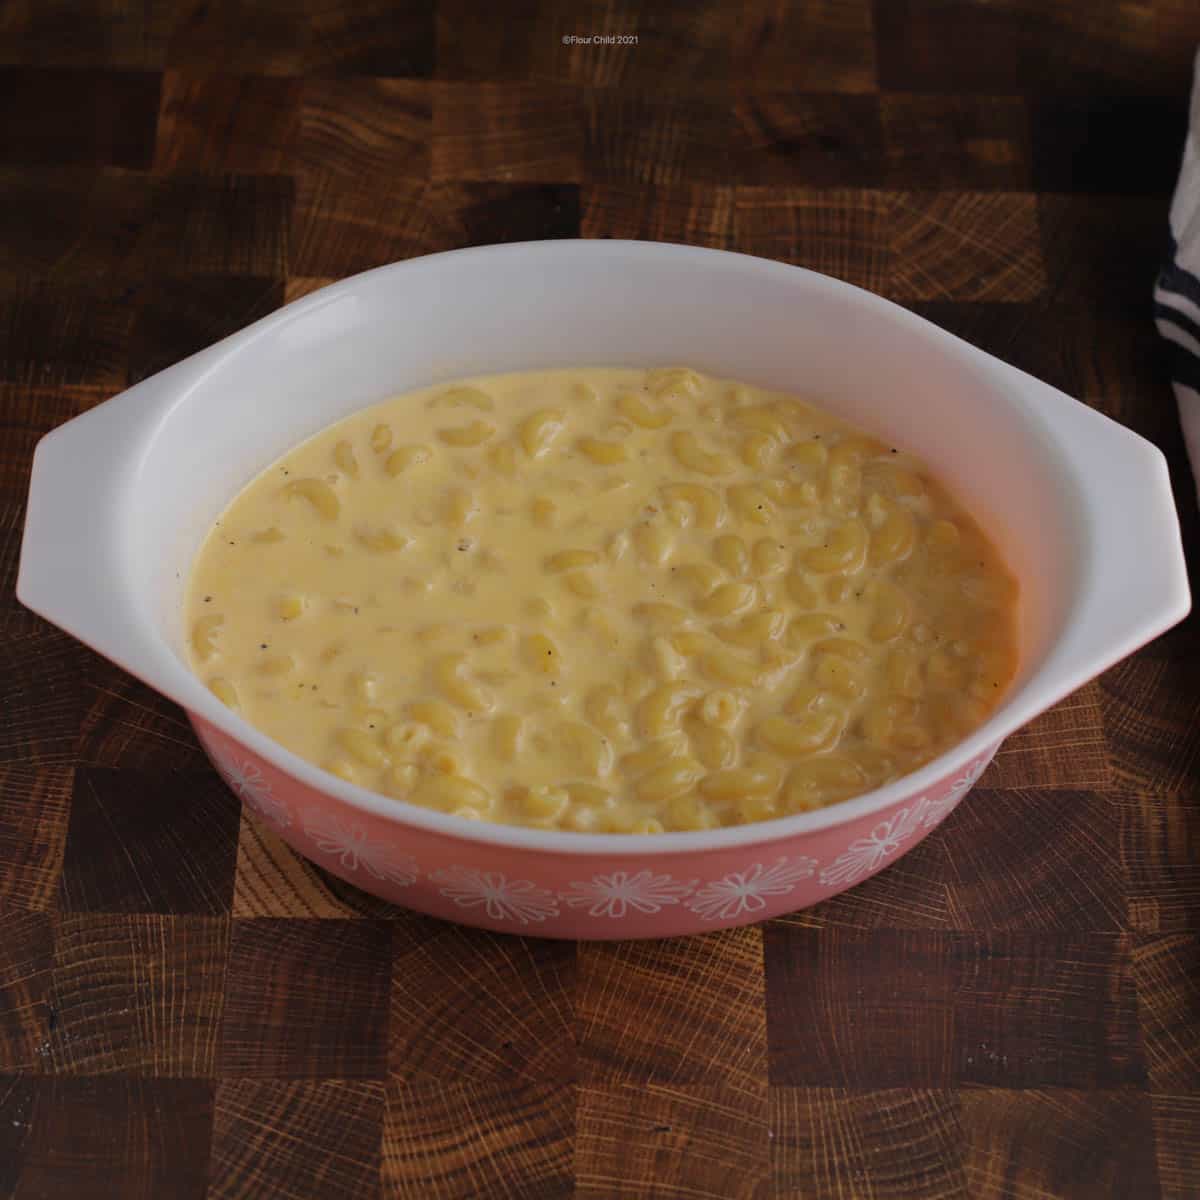 All macaroni and cheese ingredients combined in a casserole dish